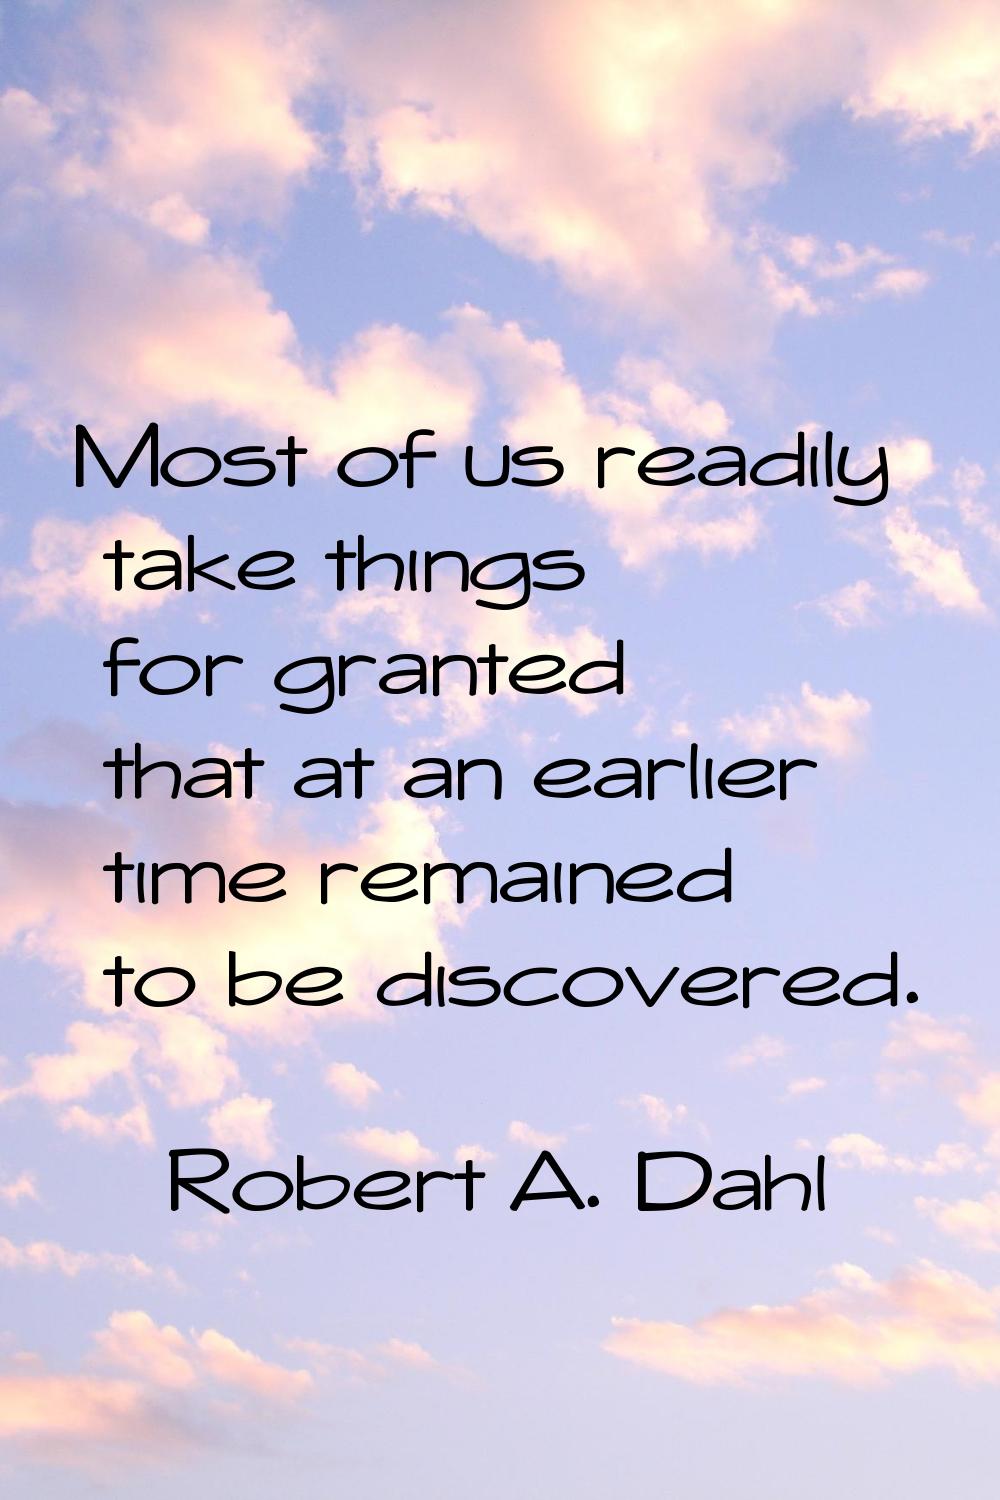 Most of us readily take things for granted that at an earlier time remained to be discovered.